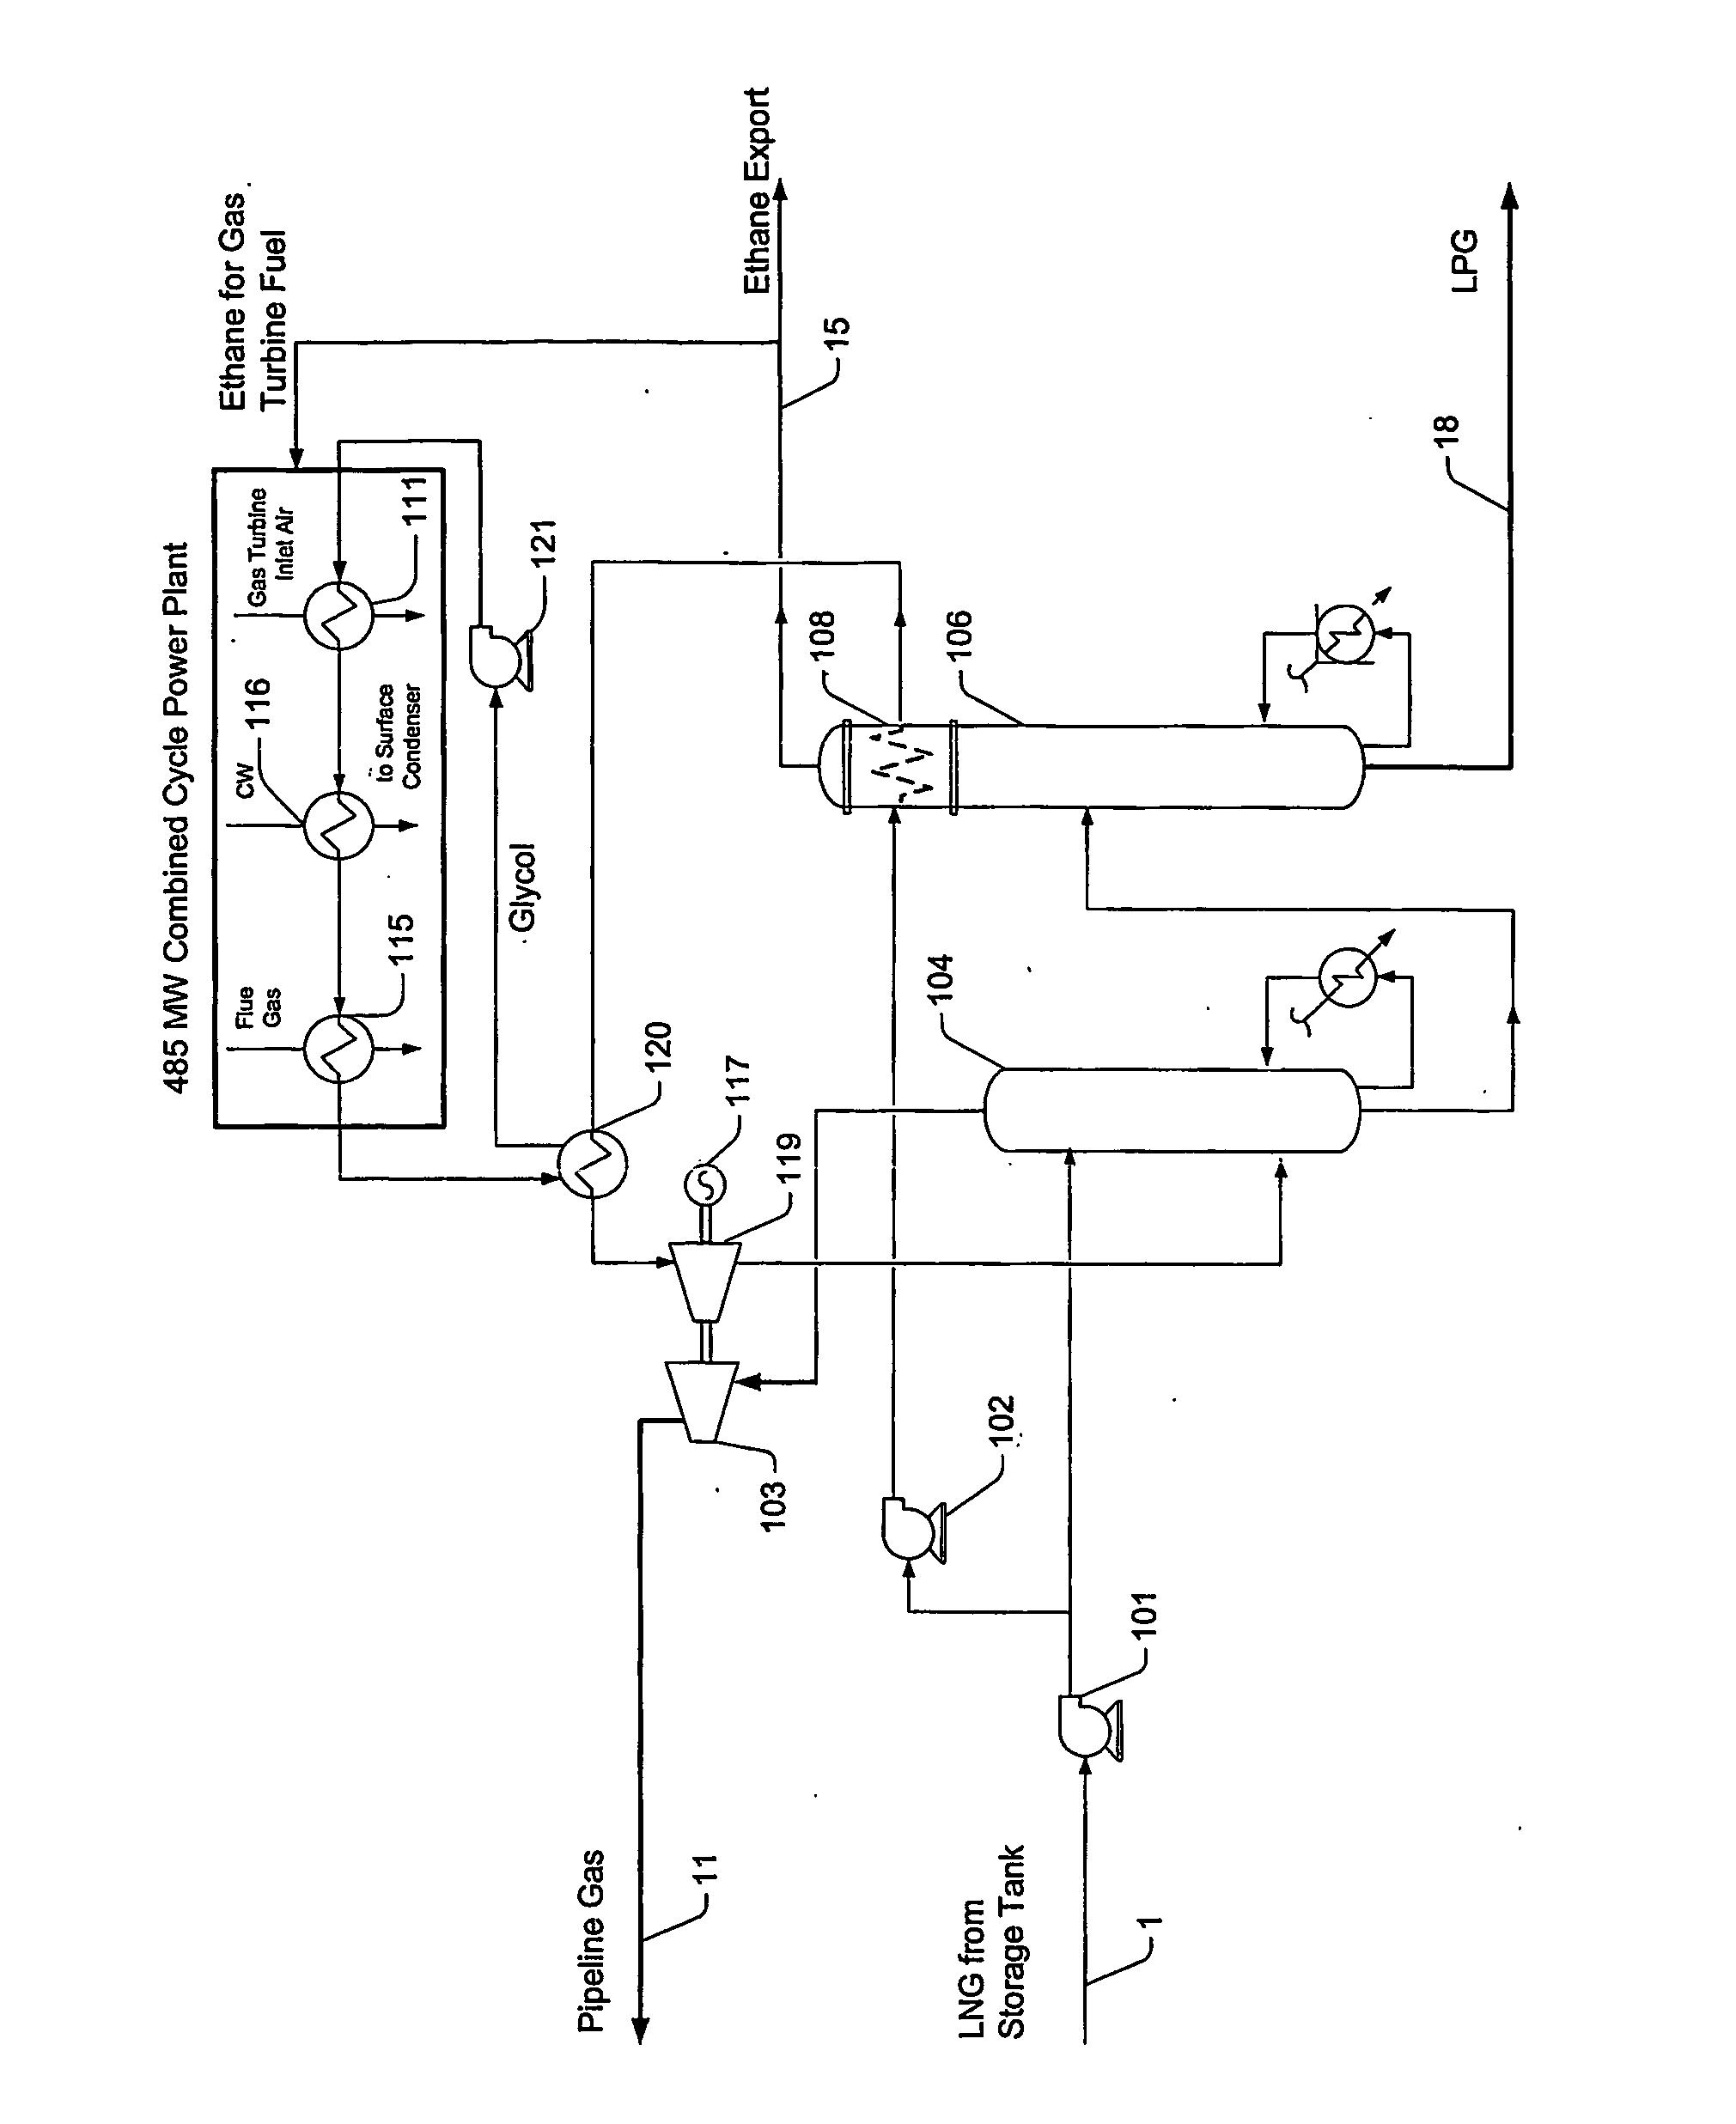 Liquefied natural gas regasification configuration and method